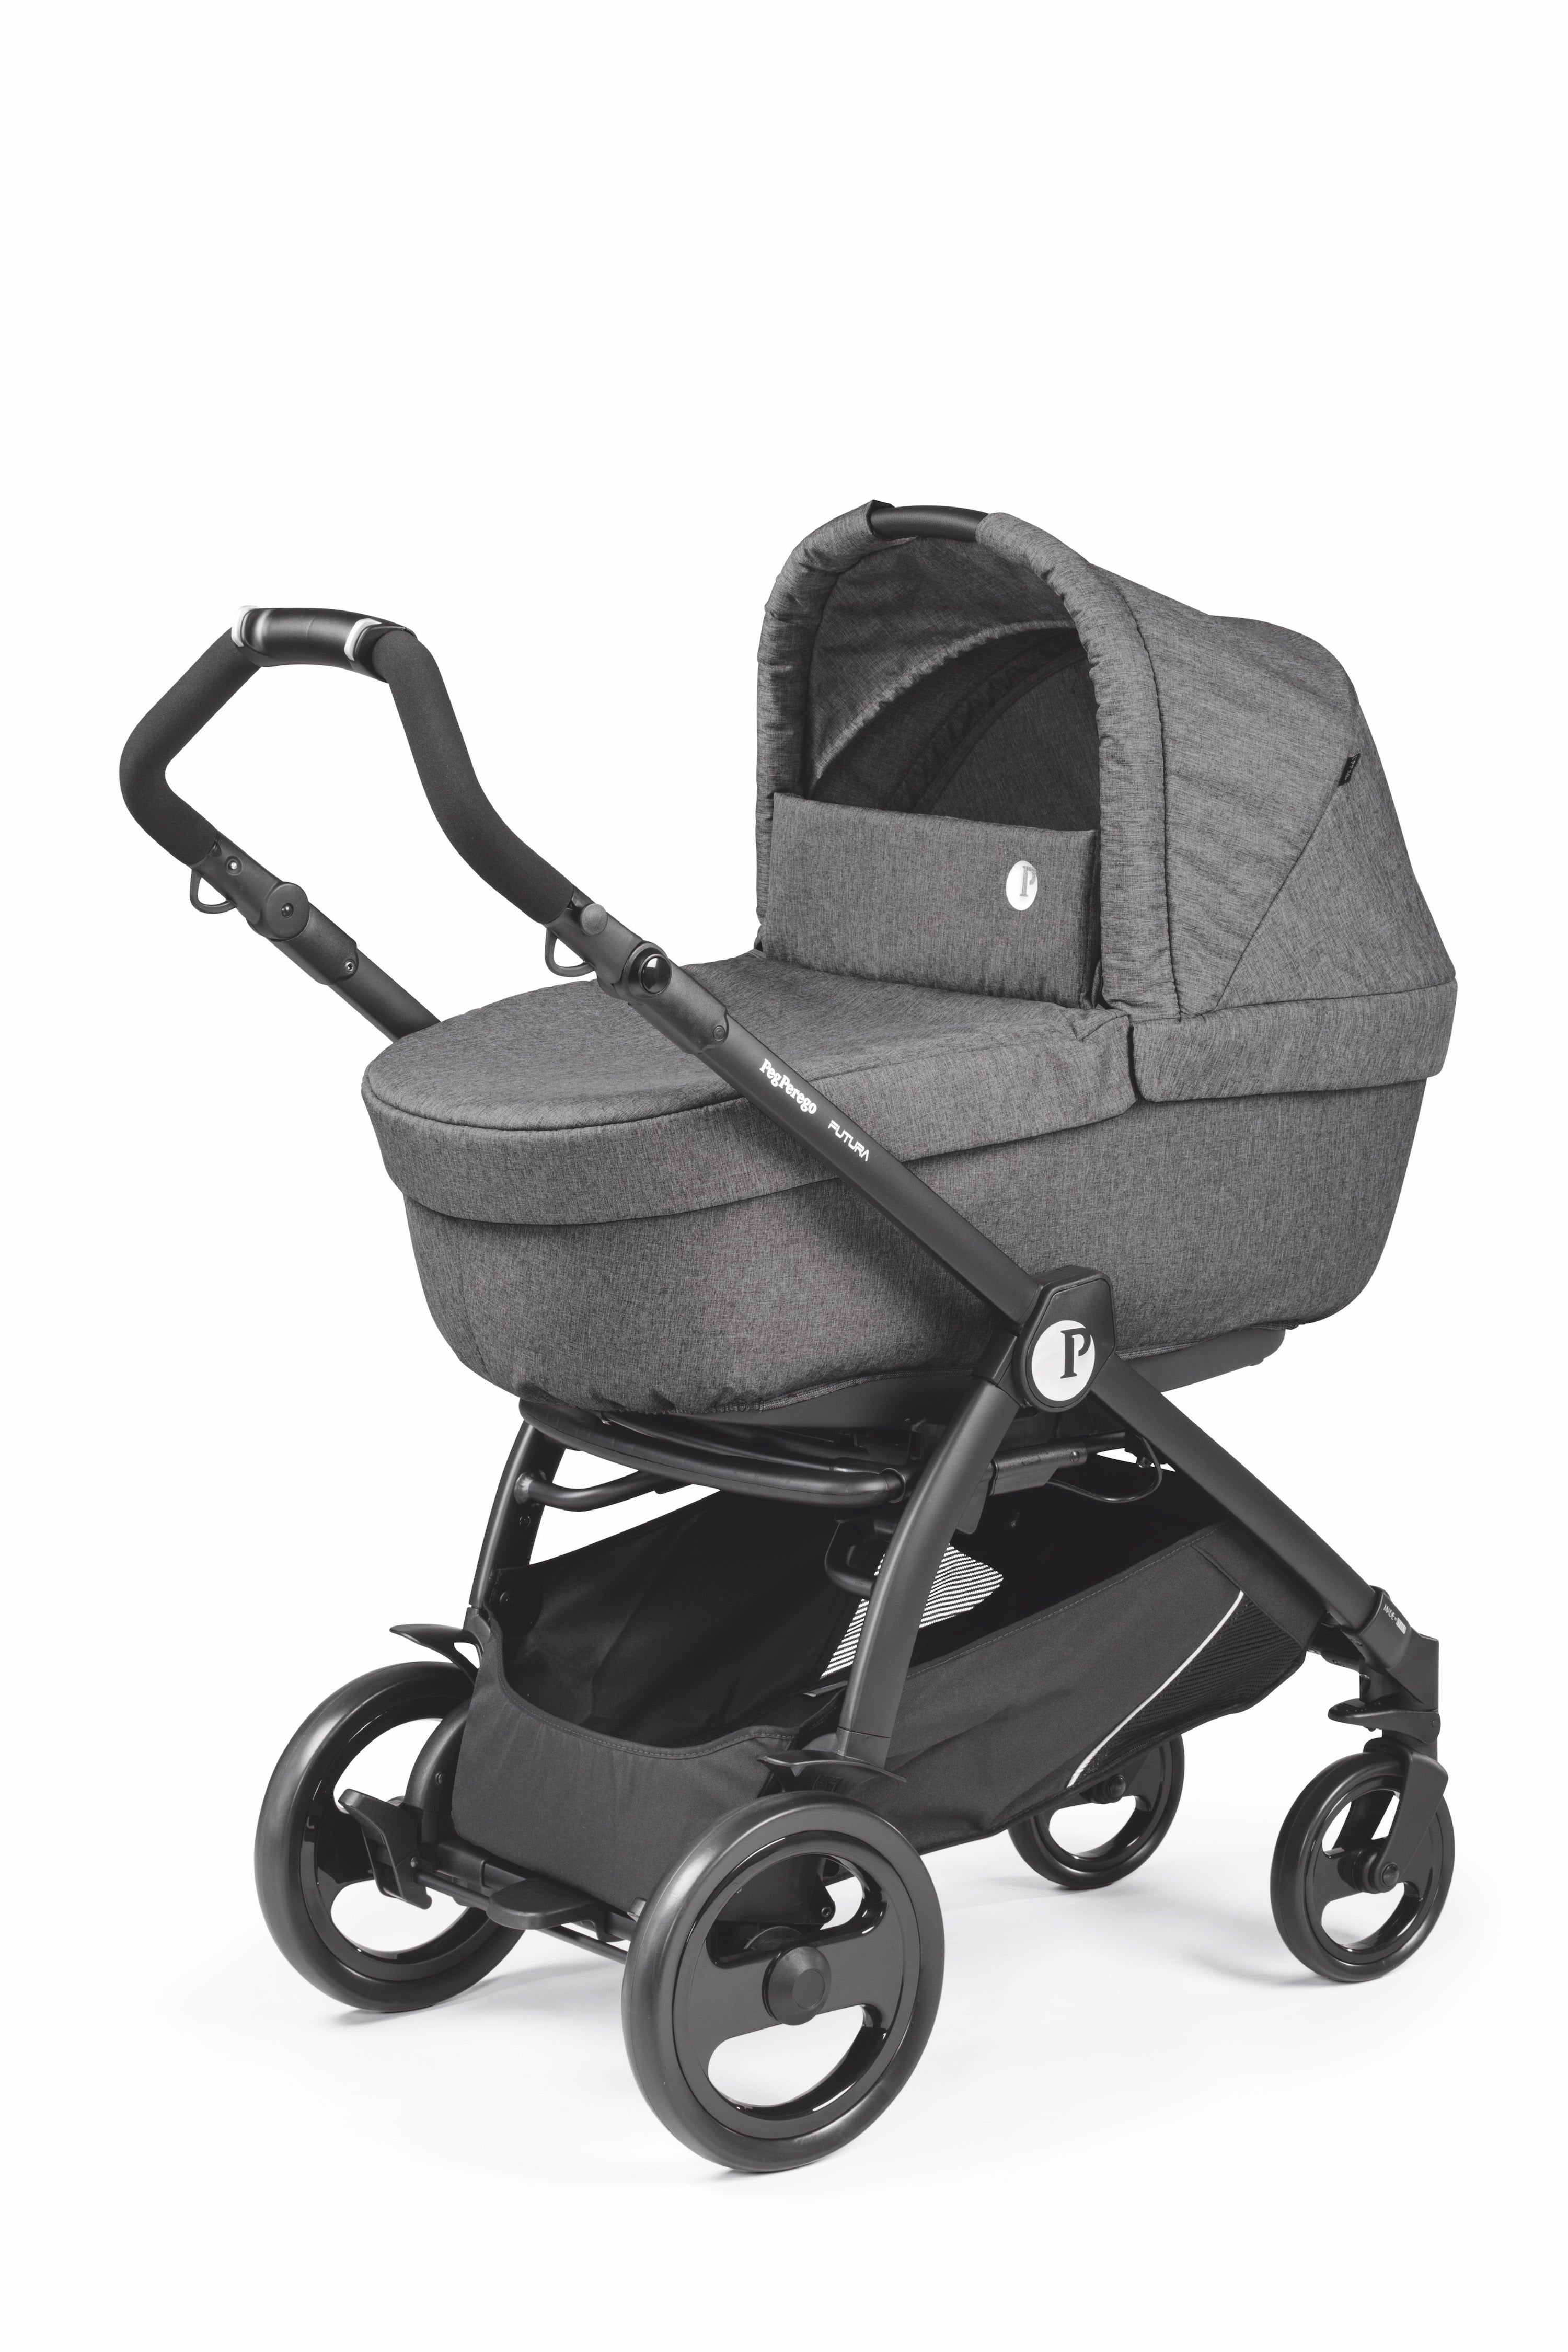 Peg Perego Futura Modular System - Centralized Handlebar, Reversible Pram Seat, Bassinet, and Car Seat all in one. Available in South Africa with CB Baby.